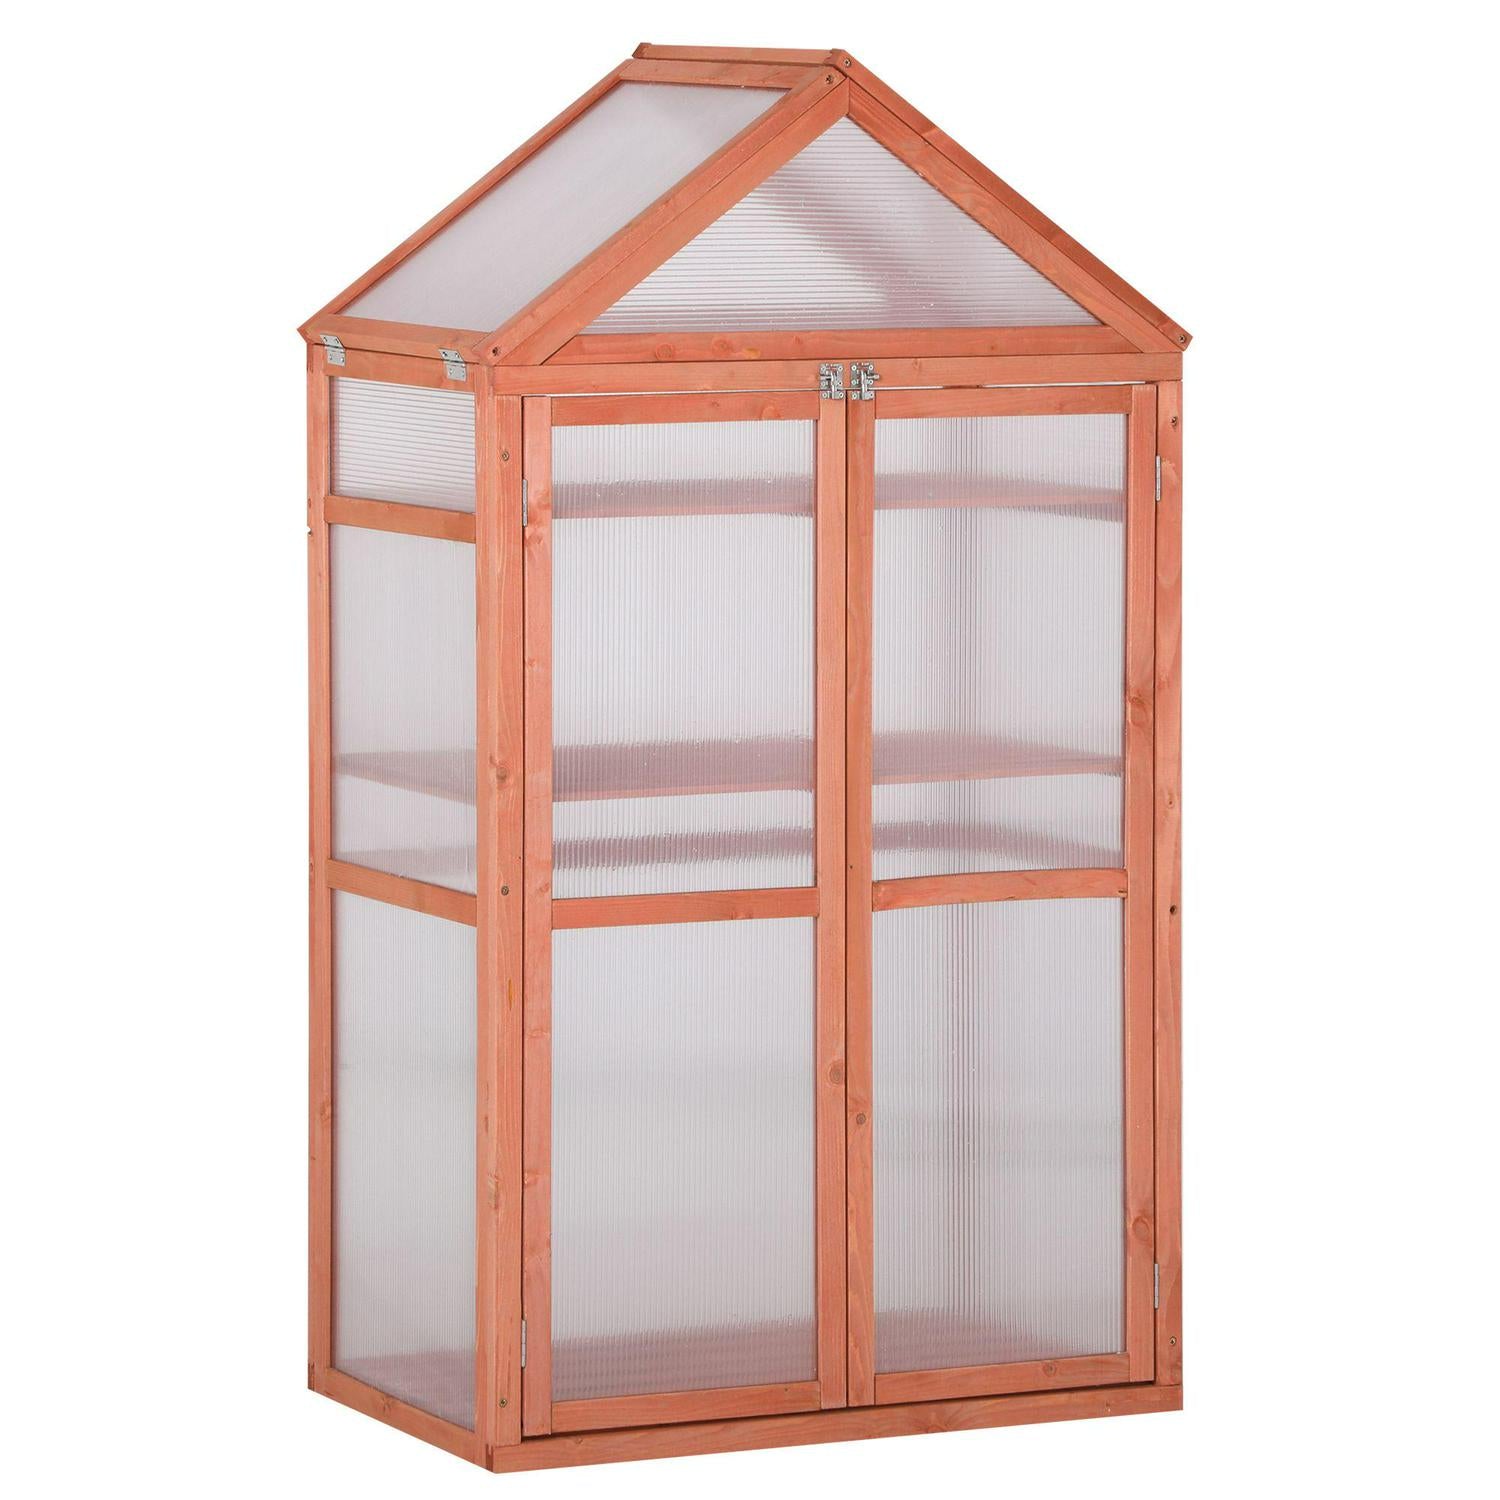 Wooden Cold Frame Greenhouse For Plants PC Board Outdoor 80 X 47 X 138cm Orange